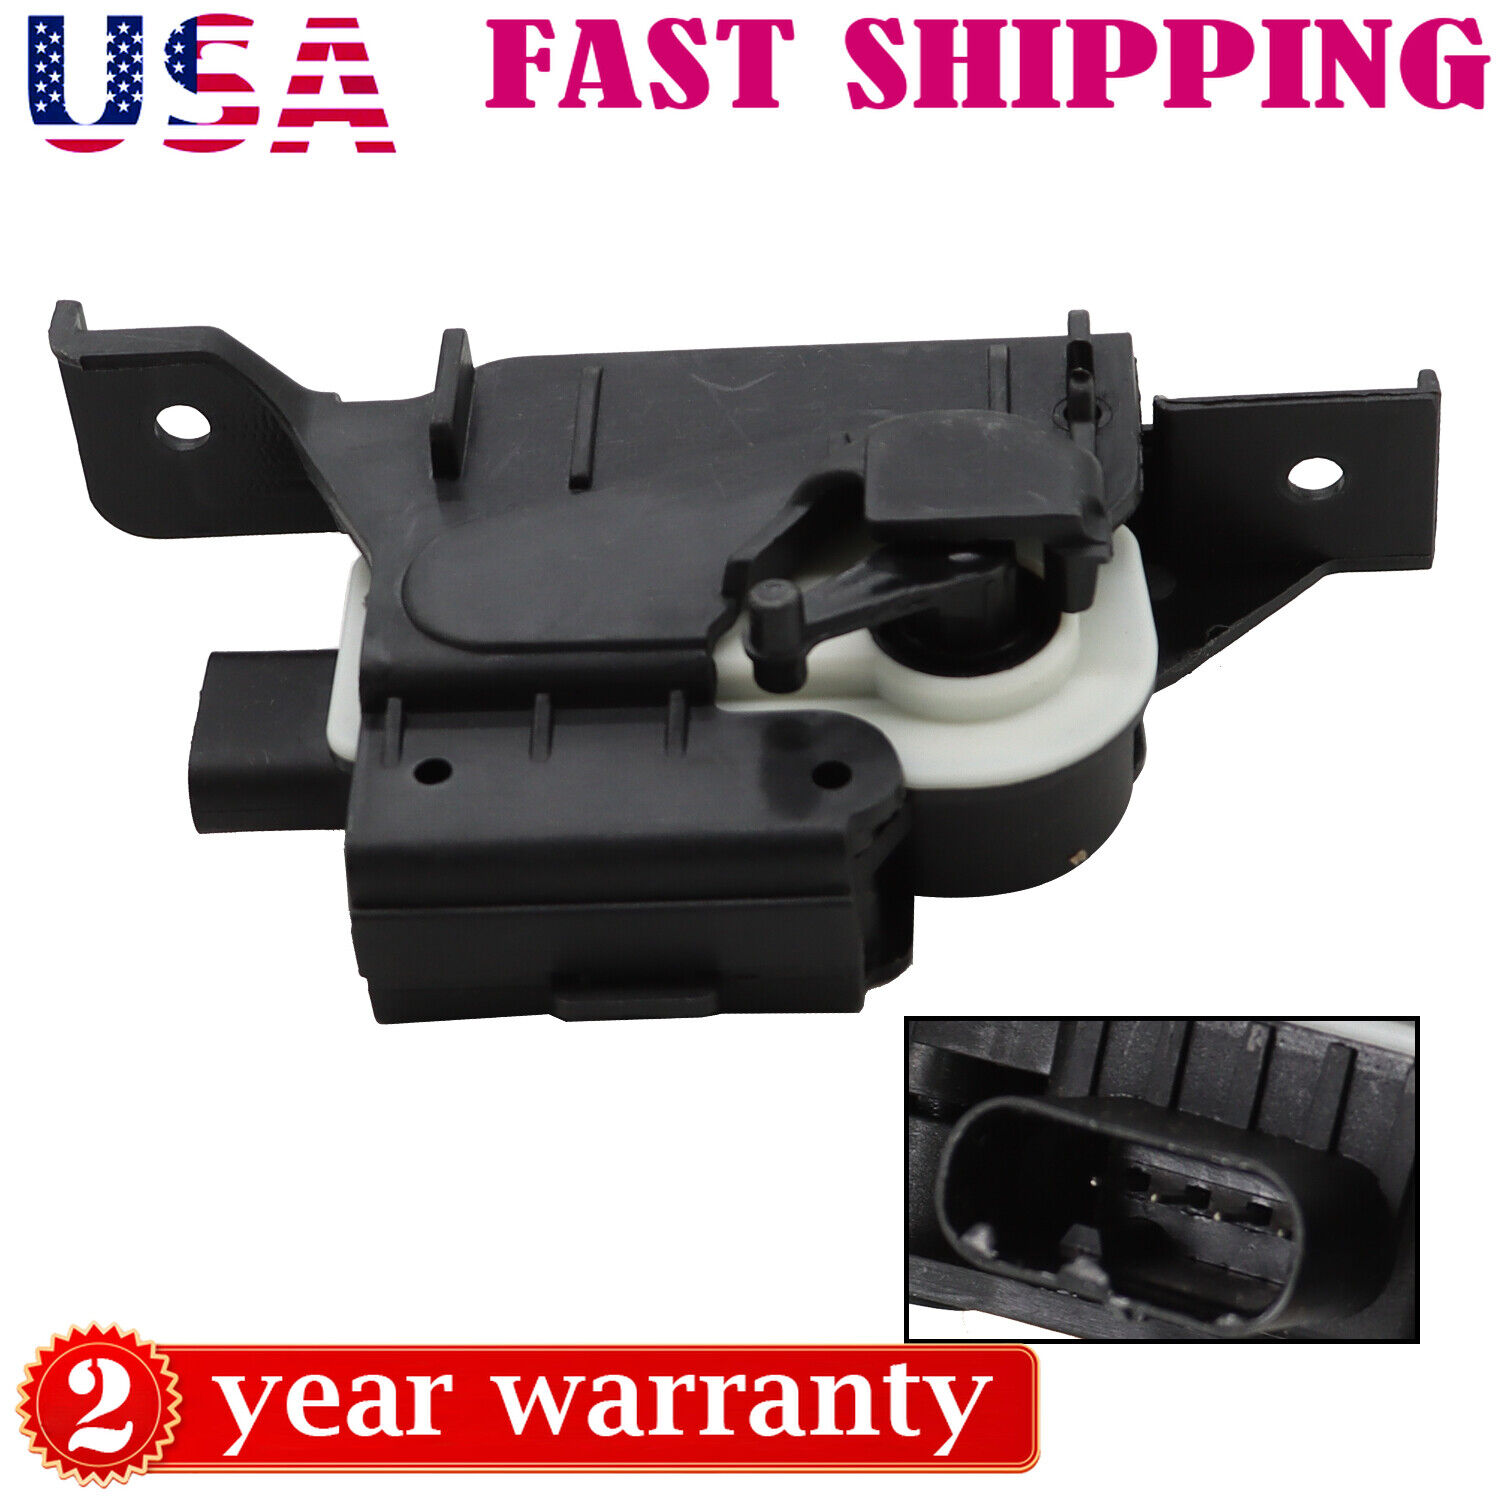 For 2013-18 Dodge Ram 1500 2019-21 Classic Active Grille Shutter Actuator Motor